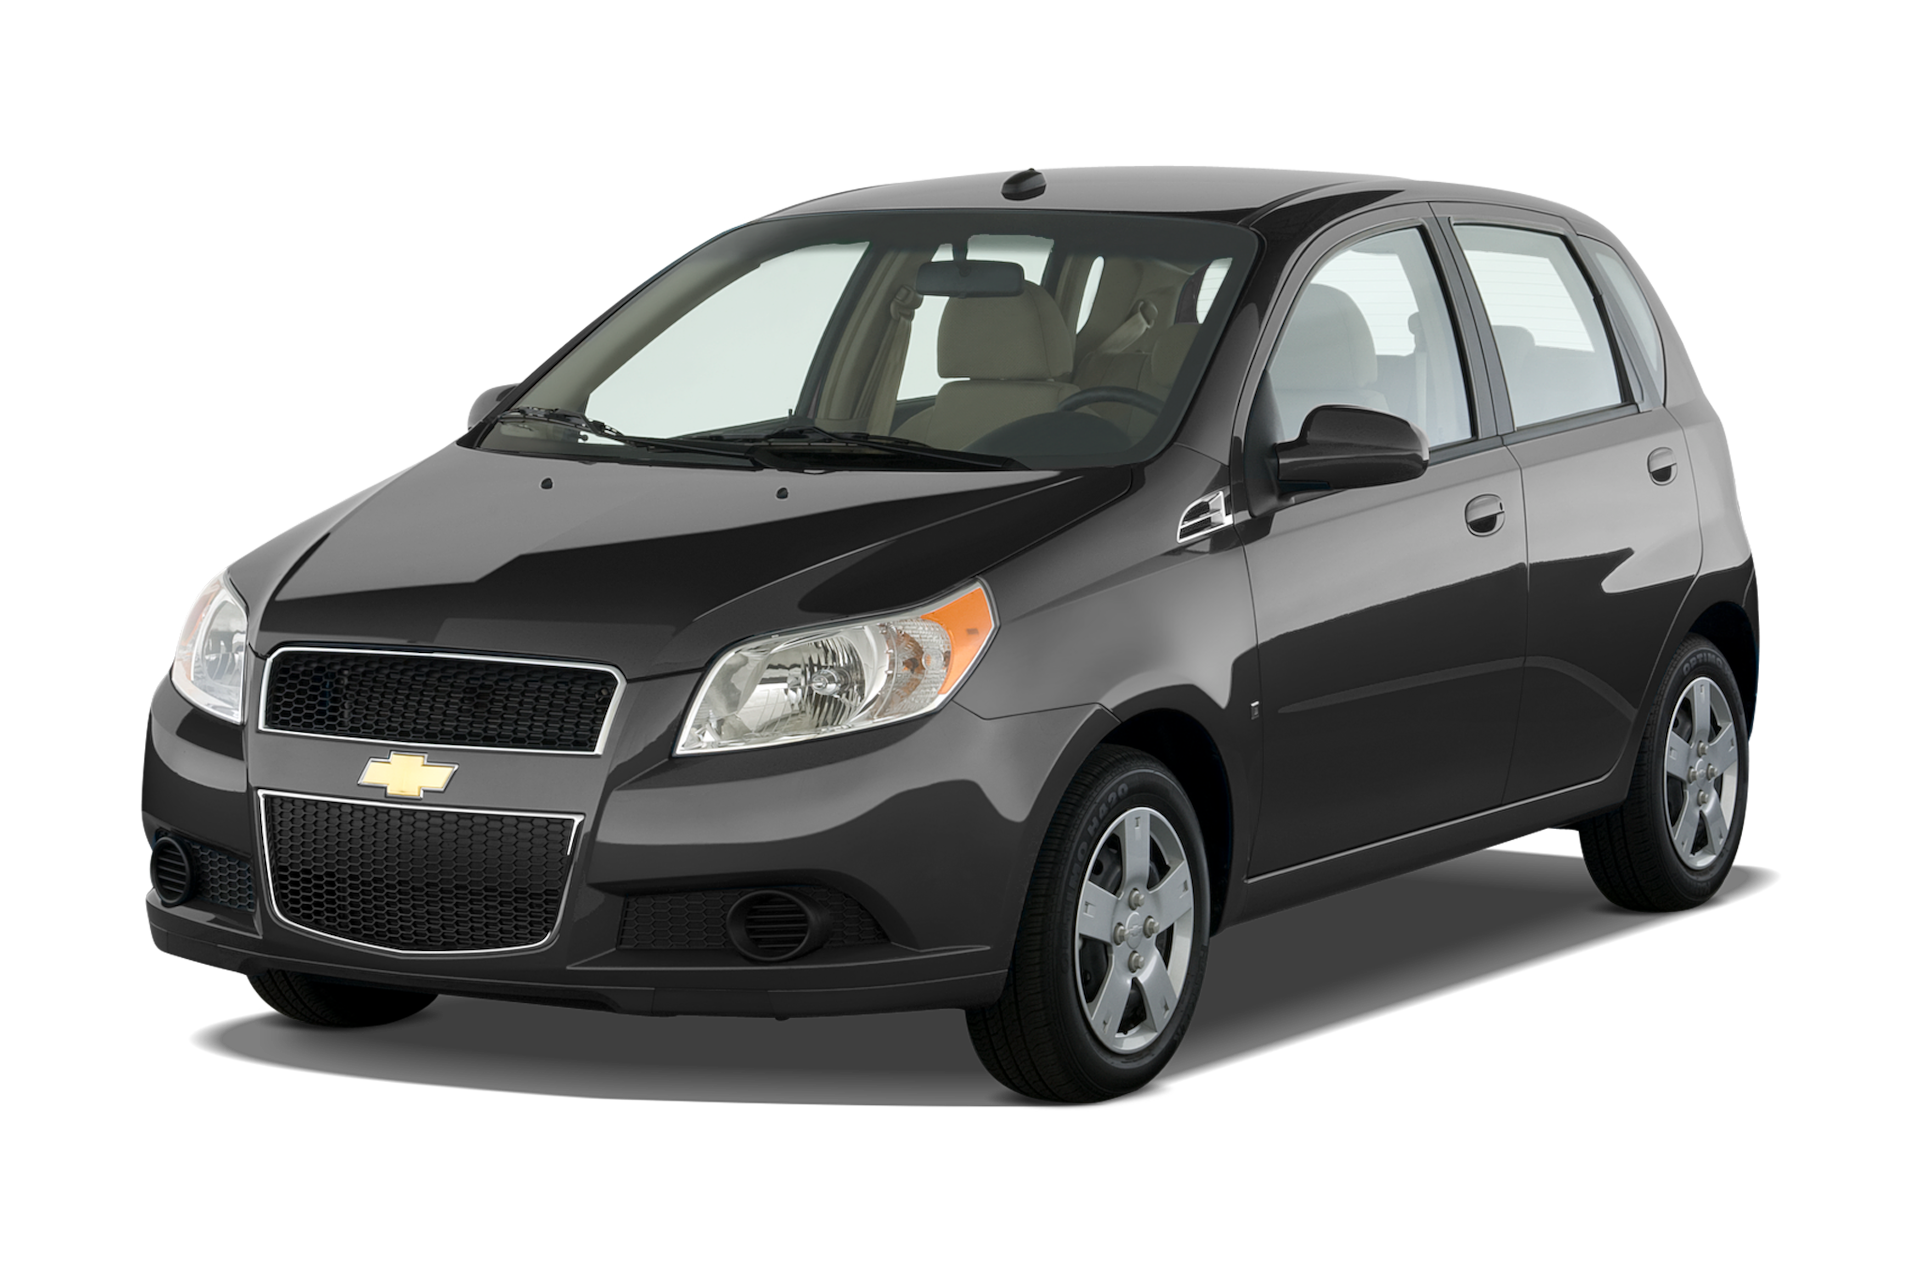 2011 Chevrolet Aveo5 Prices, Reviews, and Photos - MotorTrend